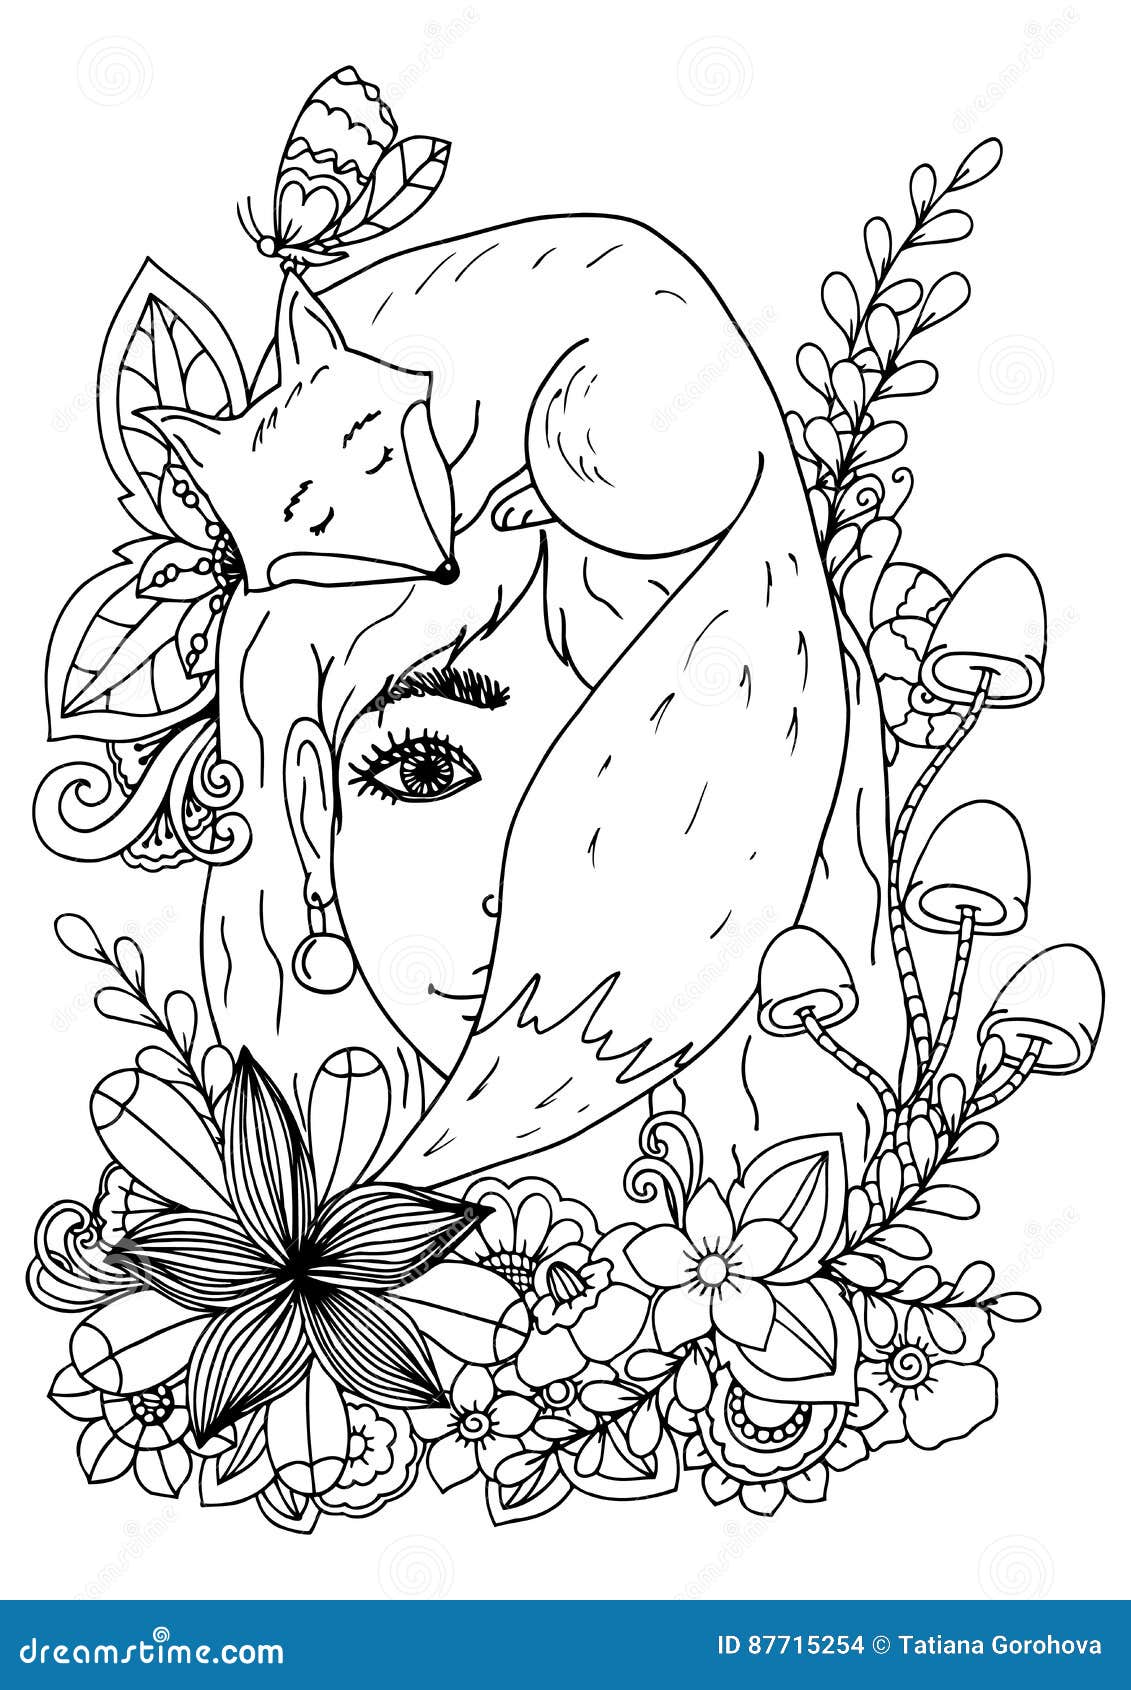 Download Vector Illustration Of Handmade Work, Zentangl Girl In The Flowers And Fox. Doodle Drawing ...